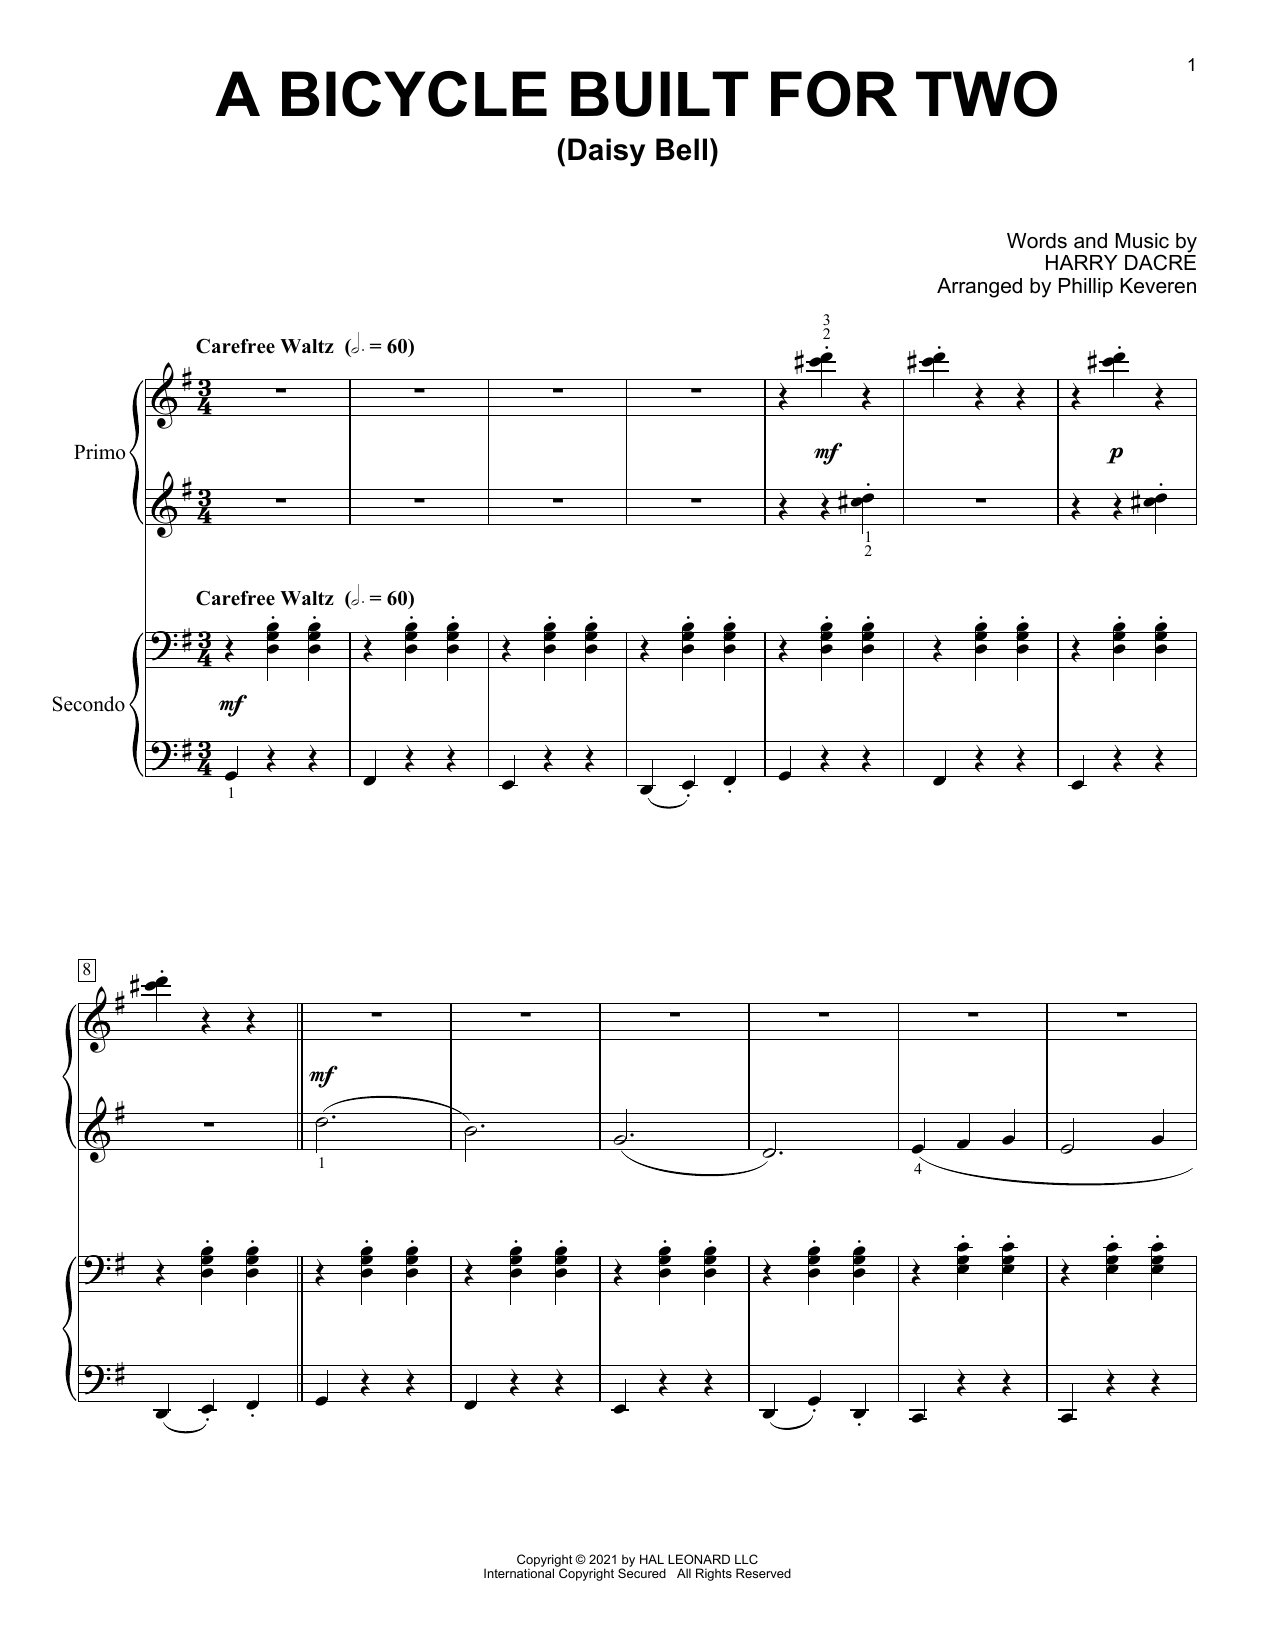 Download Harry Dacre A Bicycle Built For Two (Daisy Bell) (a Sheet Music